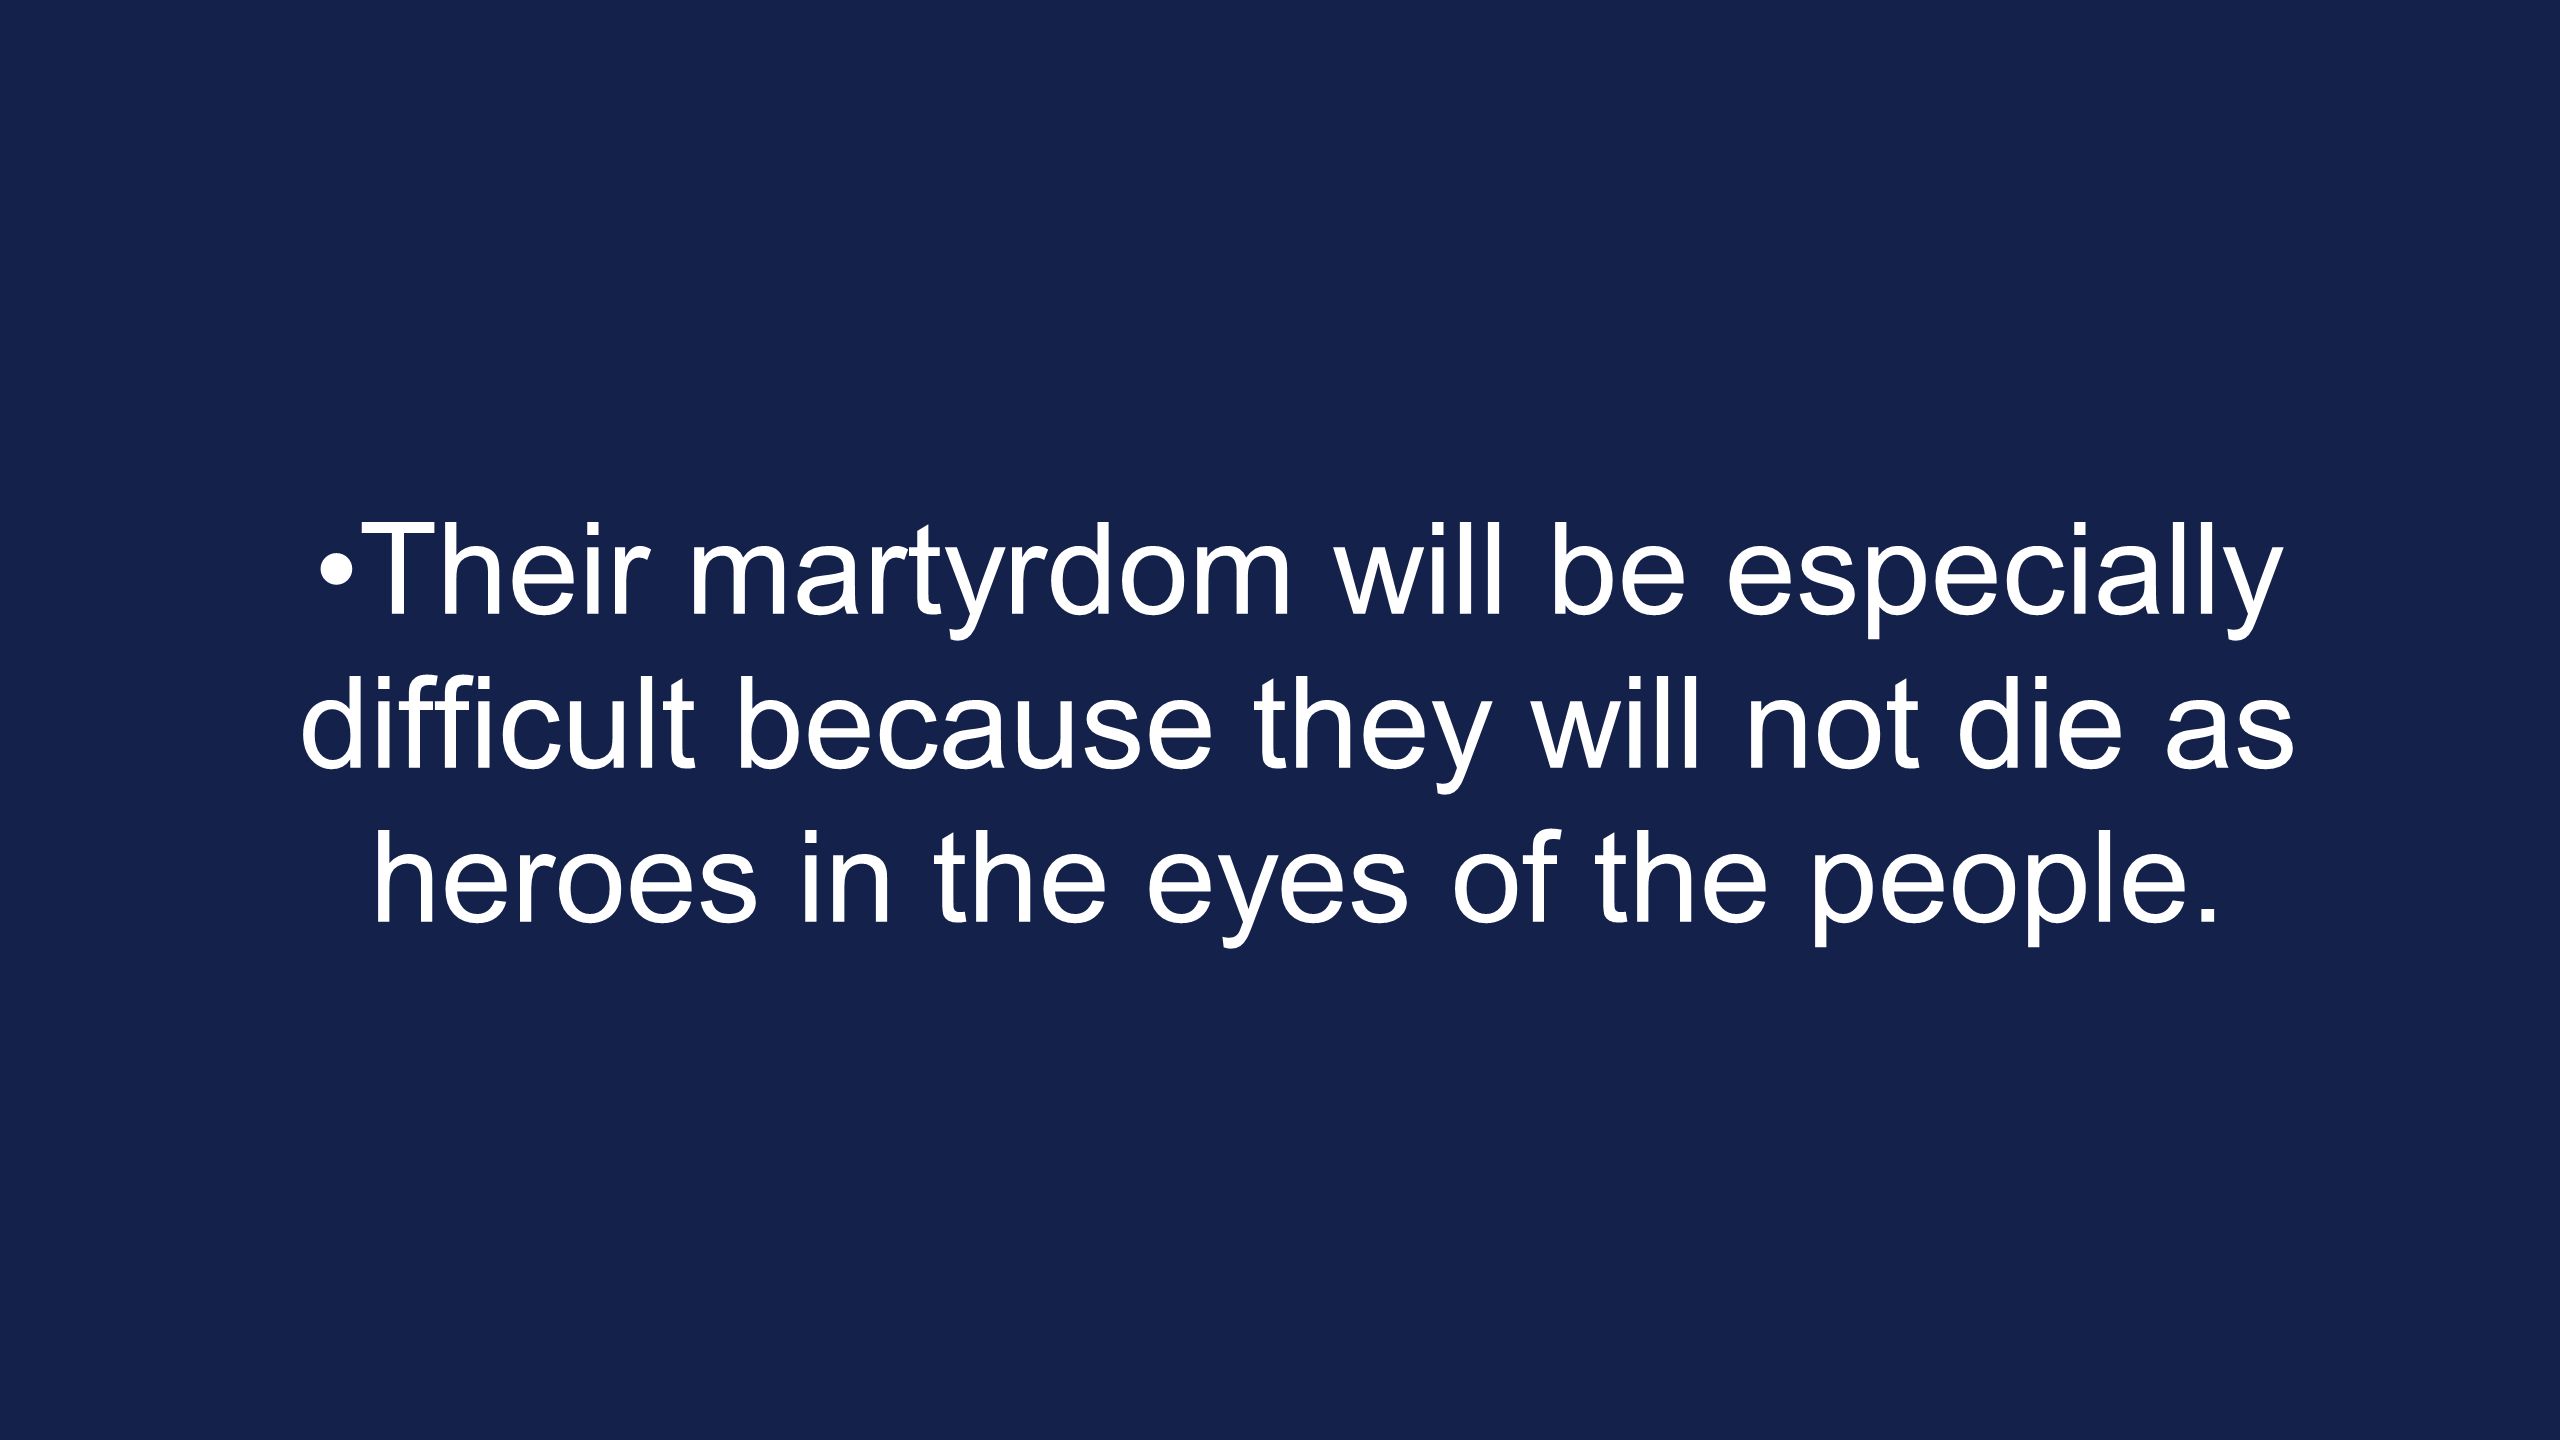 Their martyrdom will be especially difficult because they will not die as heroes in the eyes of the people.